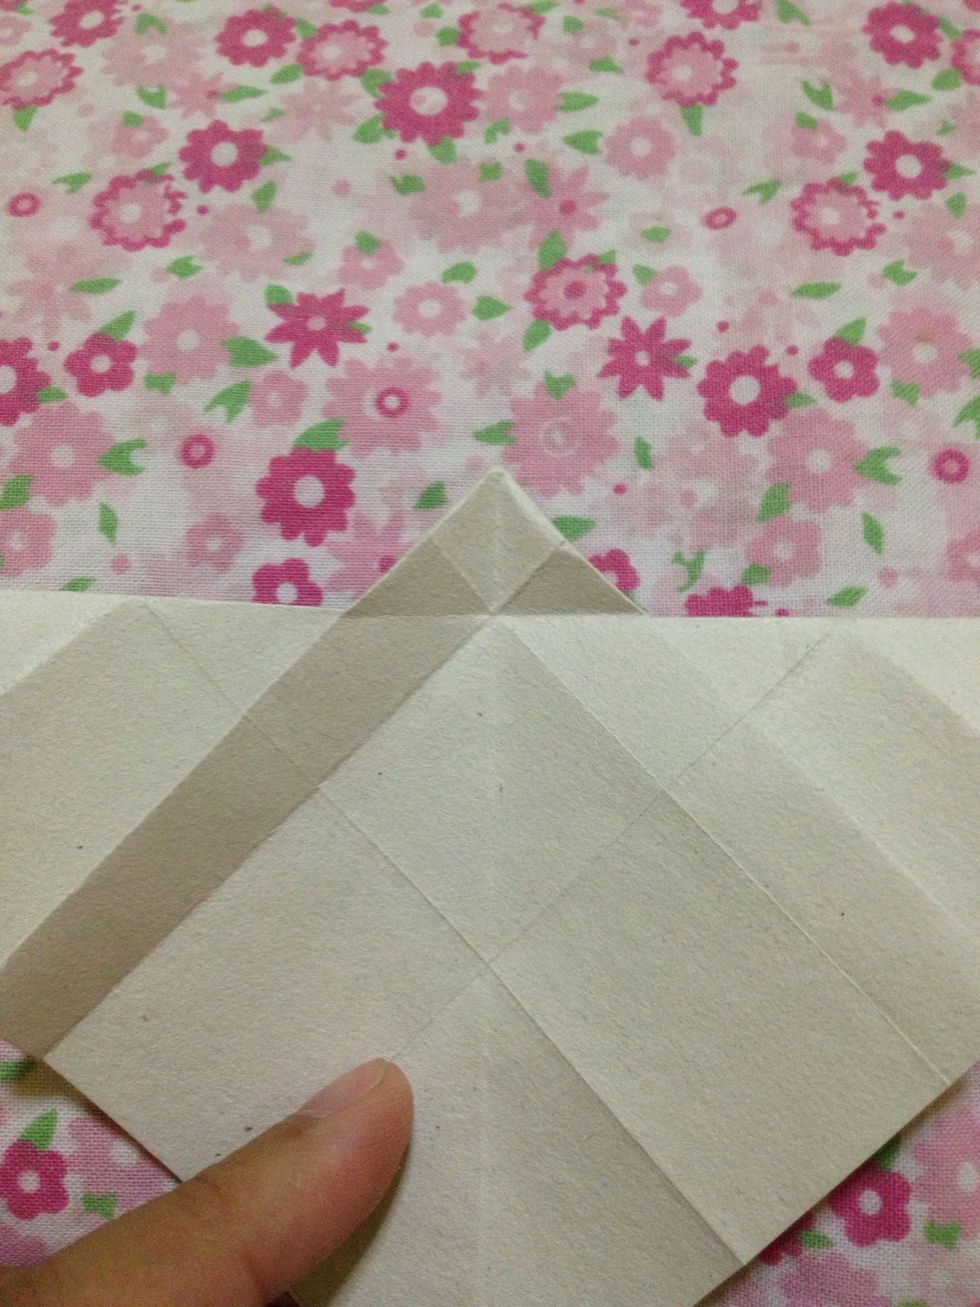 Make GOOD CREASES when doing this origami so it will look beautiful when you finished it.